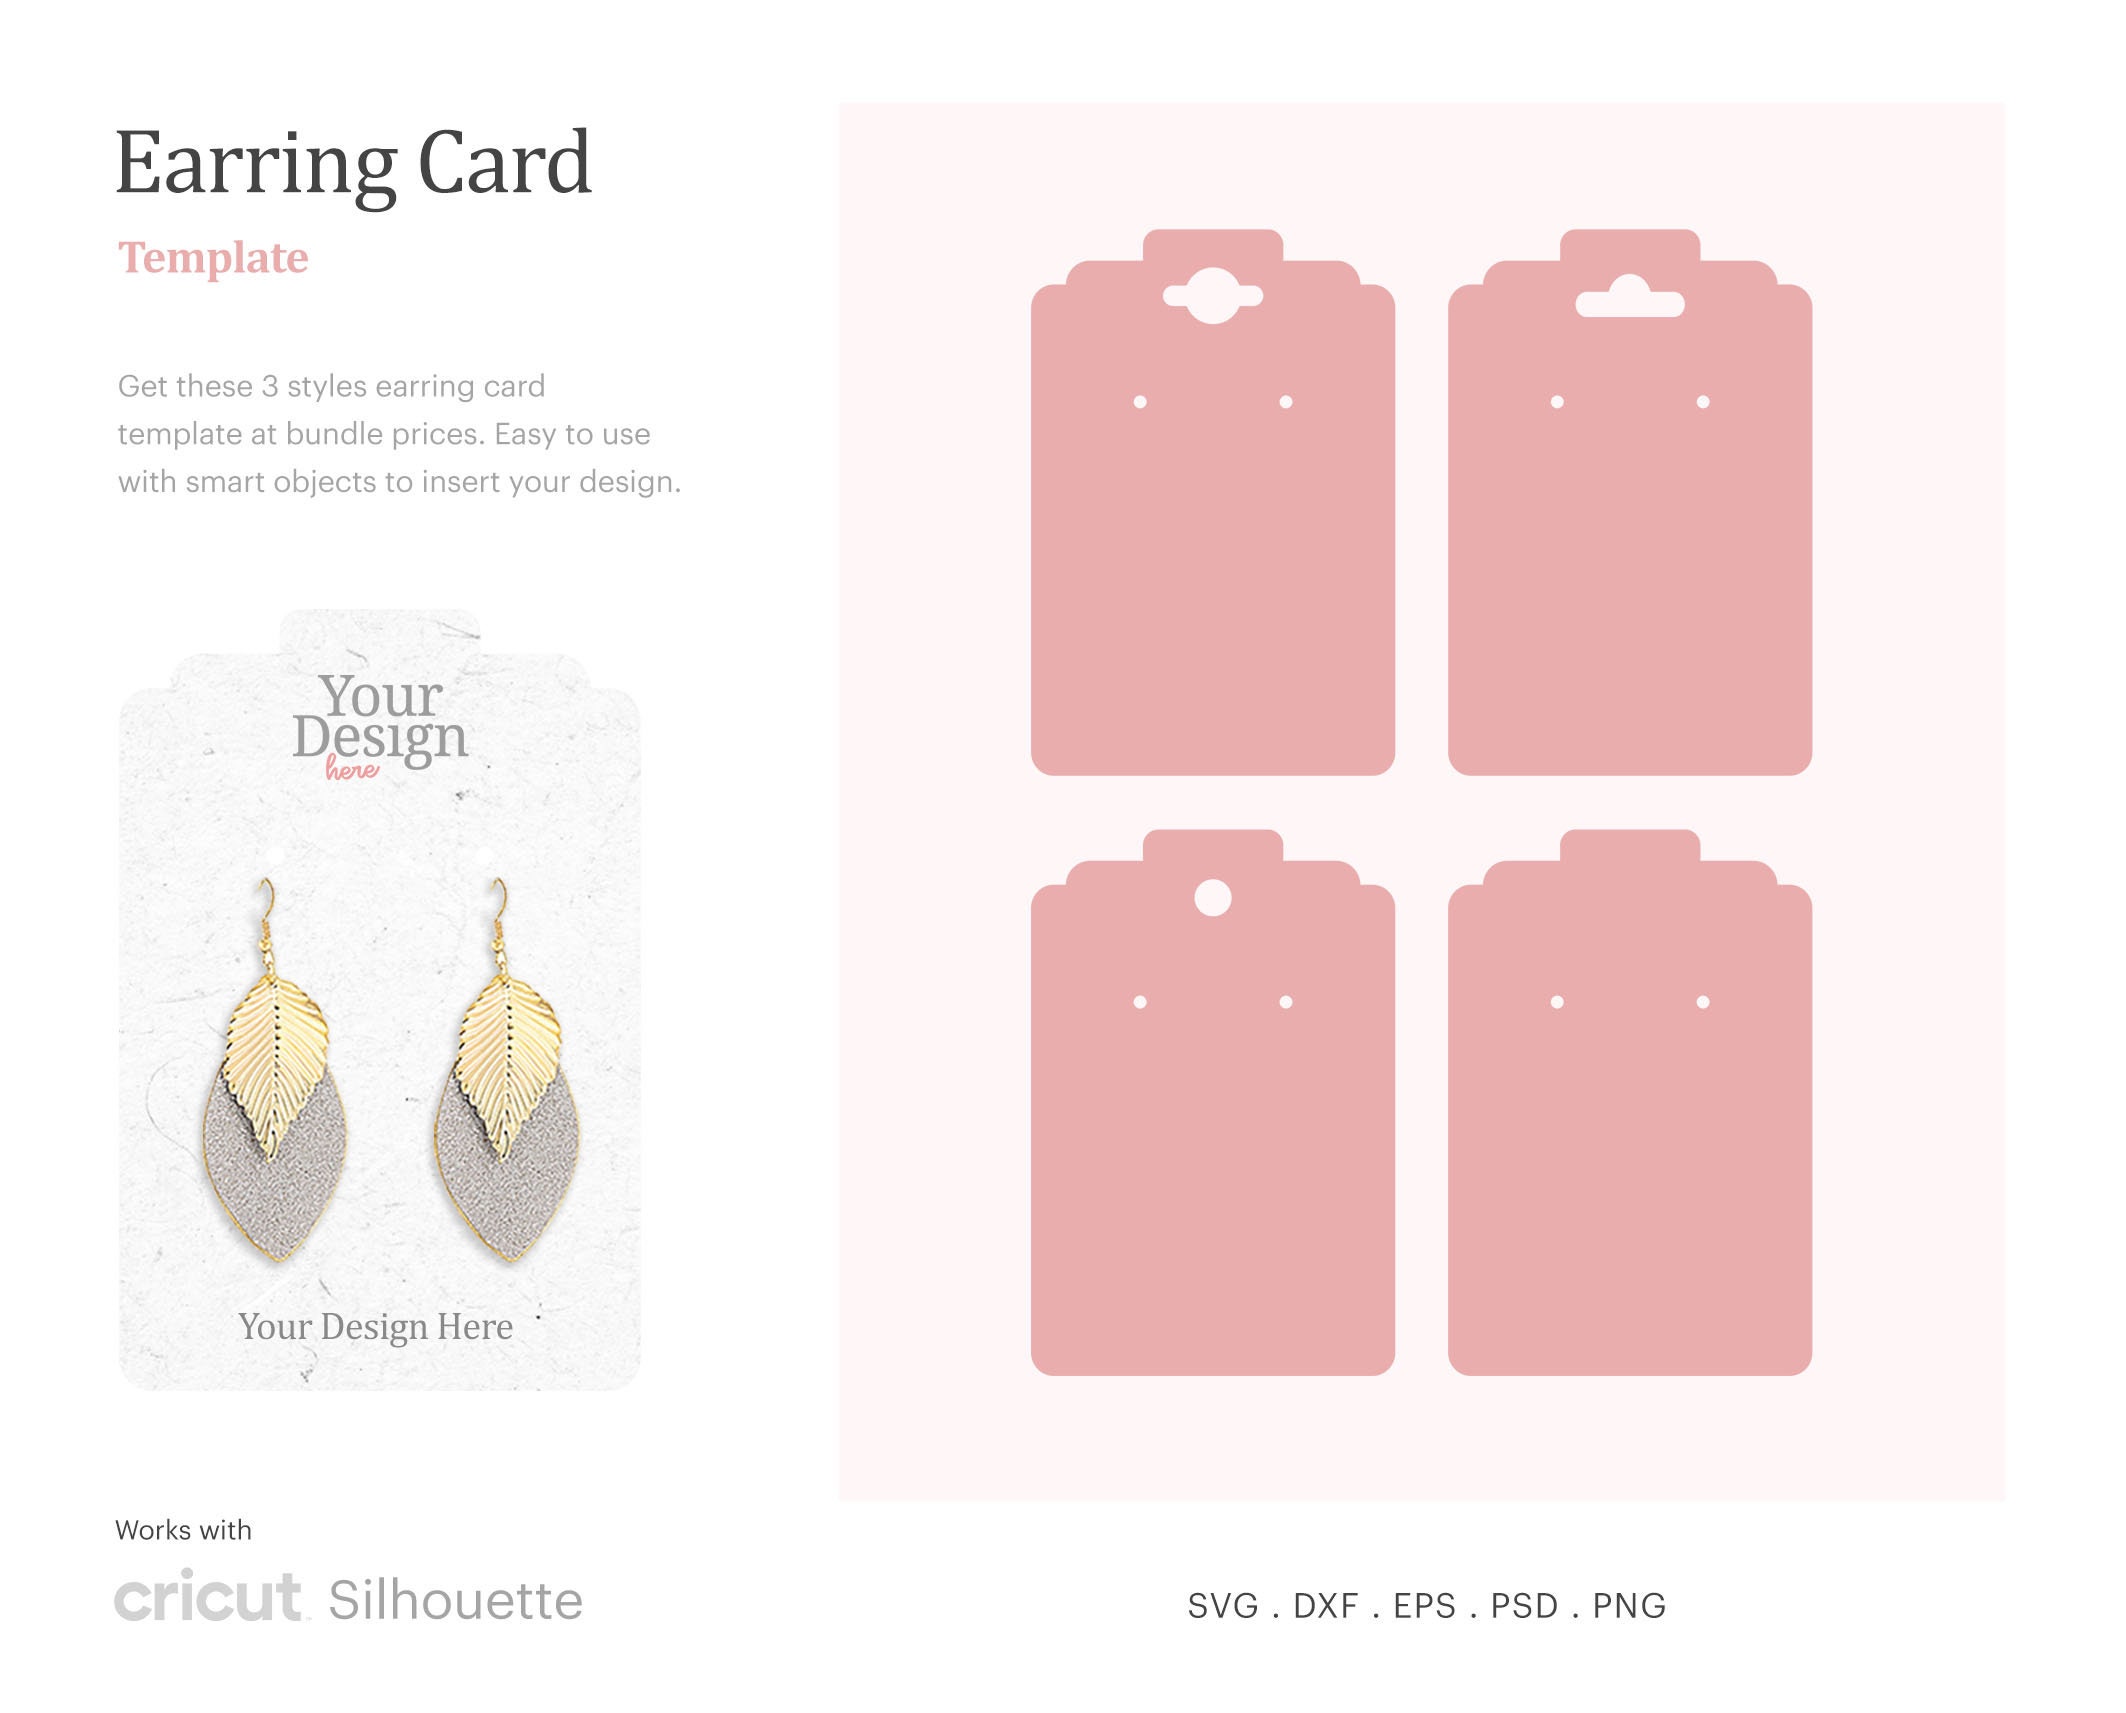 Earring Display Cards SVG, Earring Display Card, Earing Card DXF